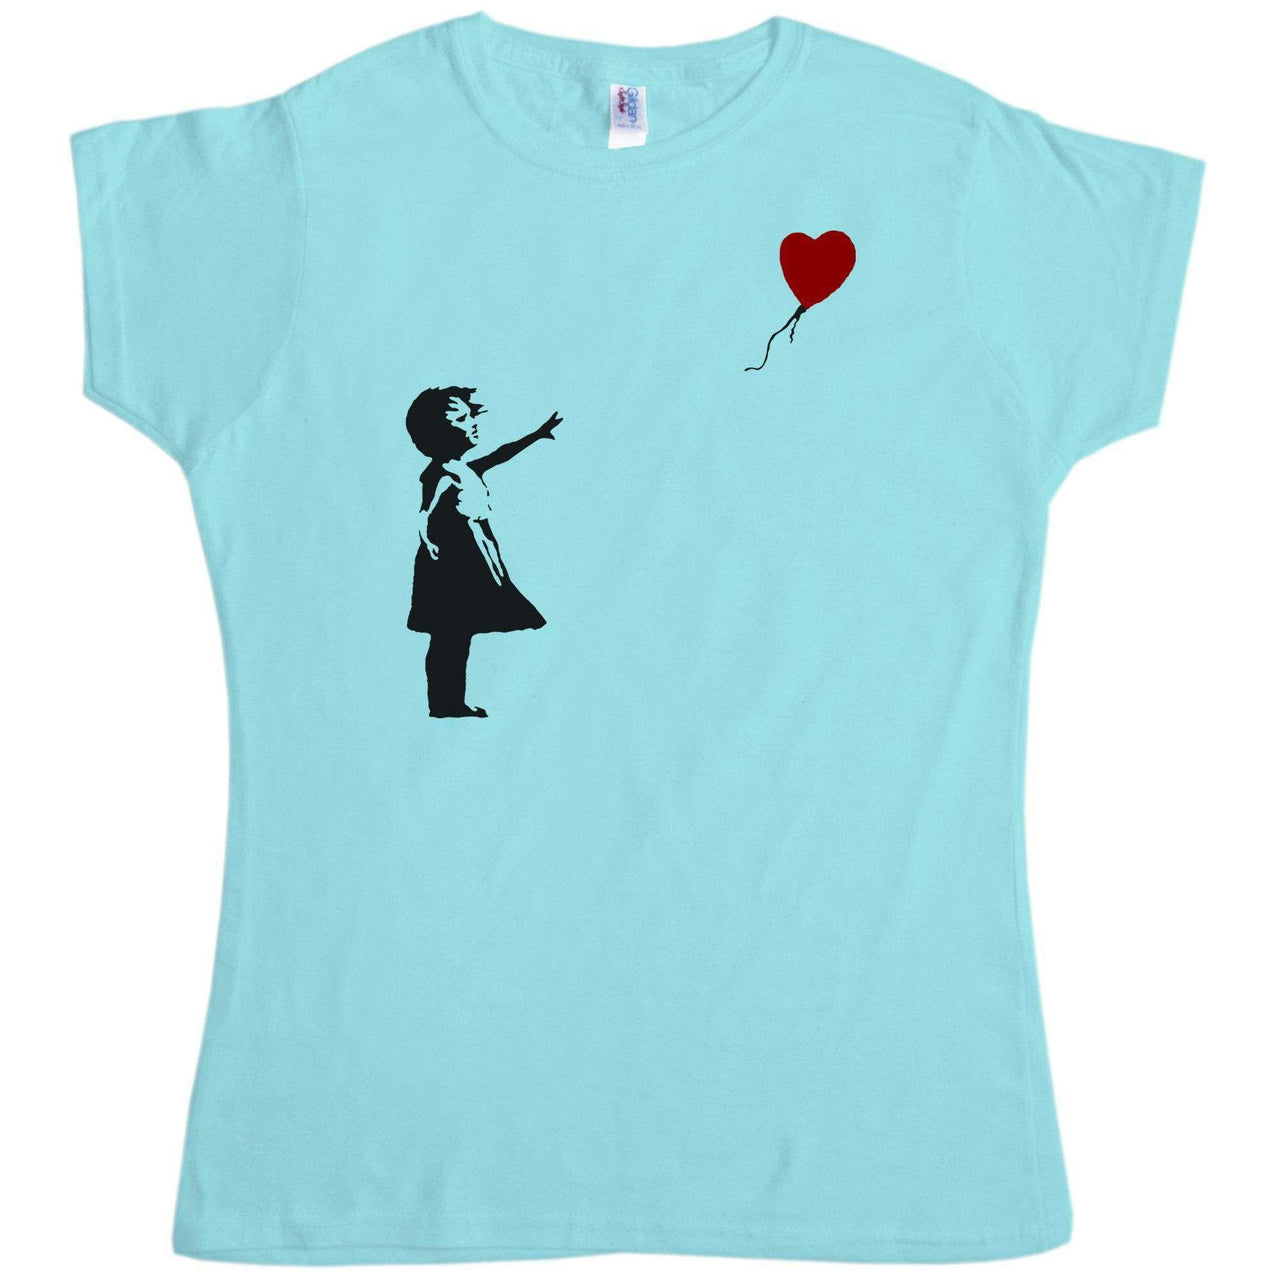 Banksy Girl With Balloon T-Shirt for Women 8Ball